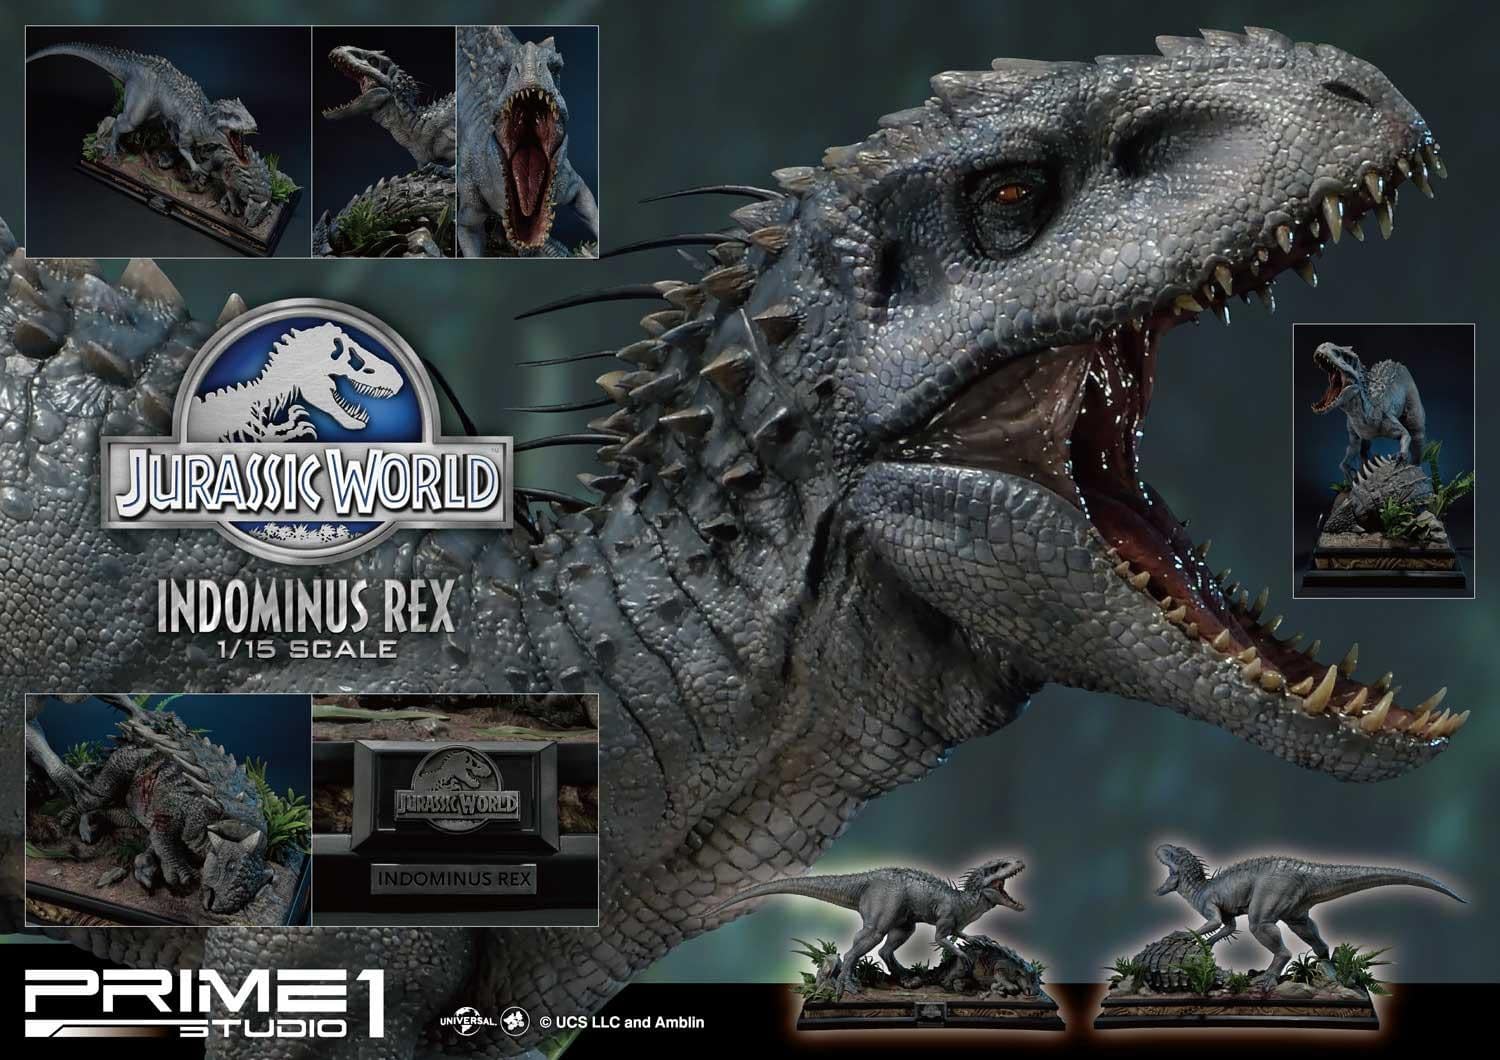 Indominous Rex Is On The Hunt With The New Prime One Studio Statue